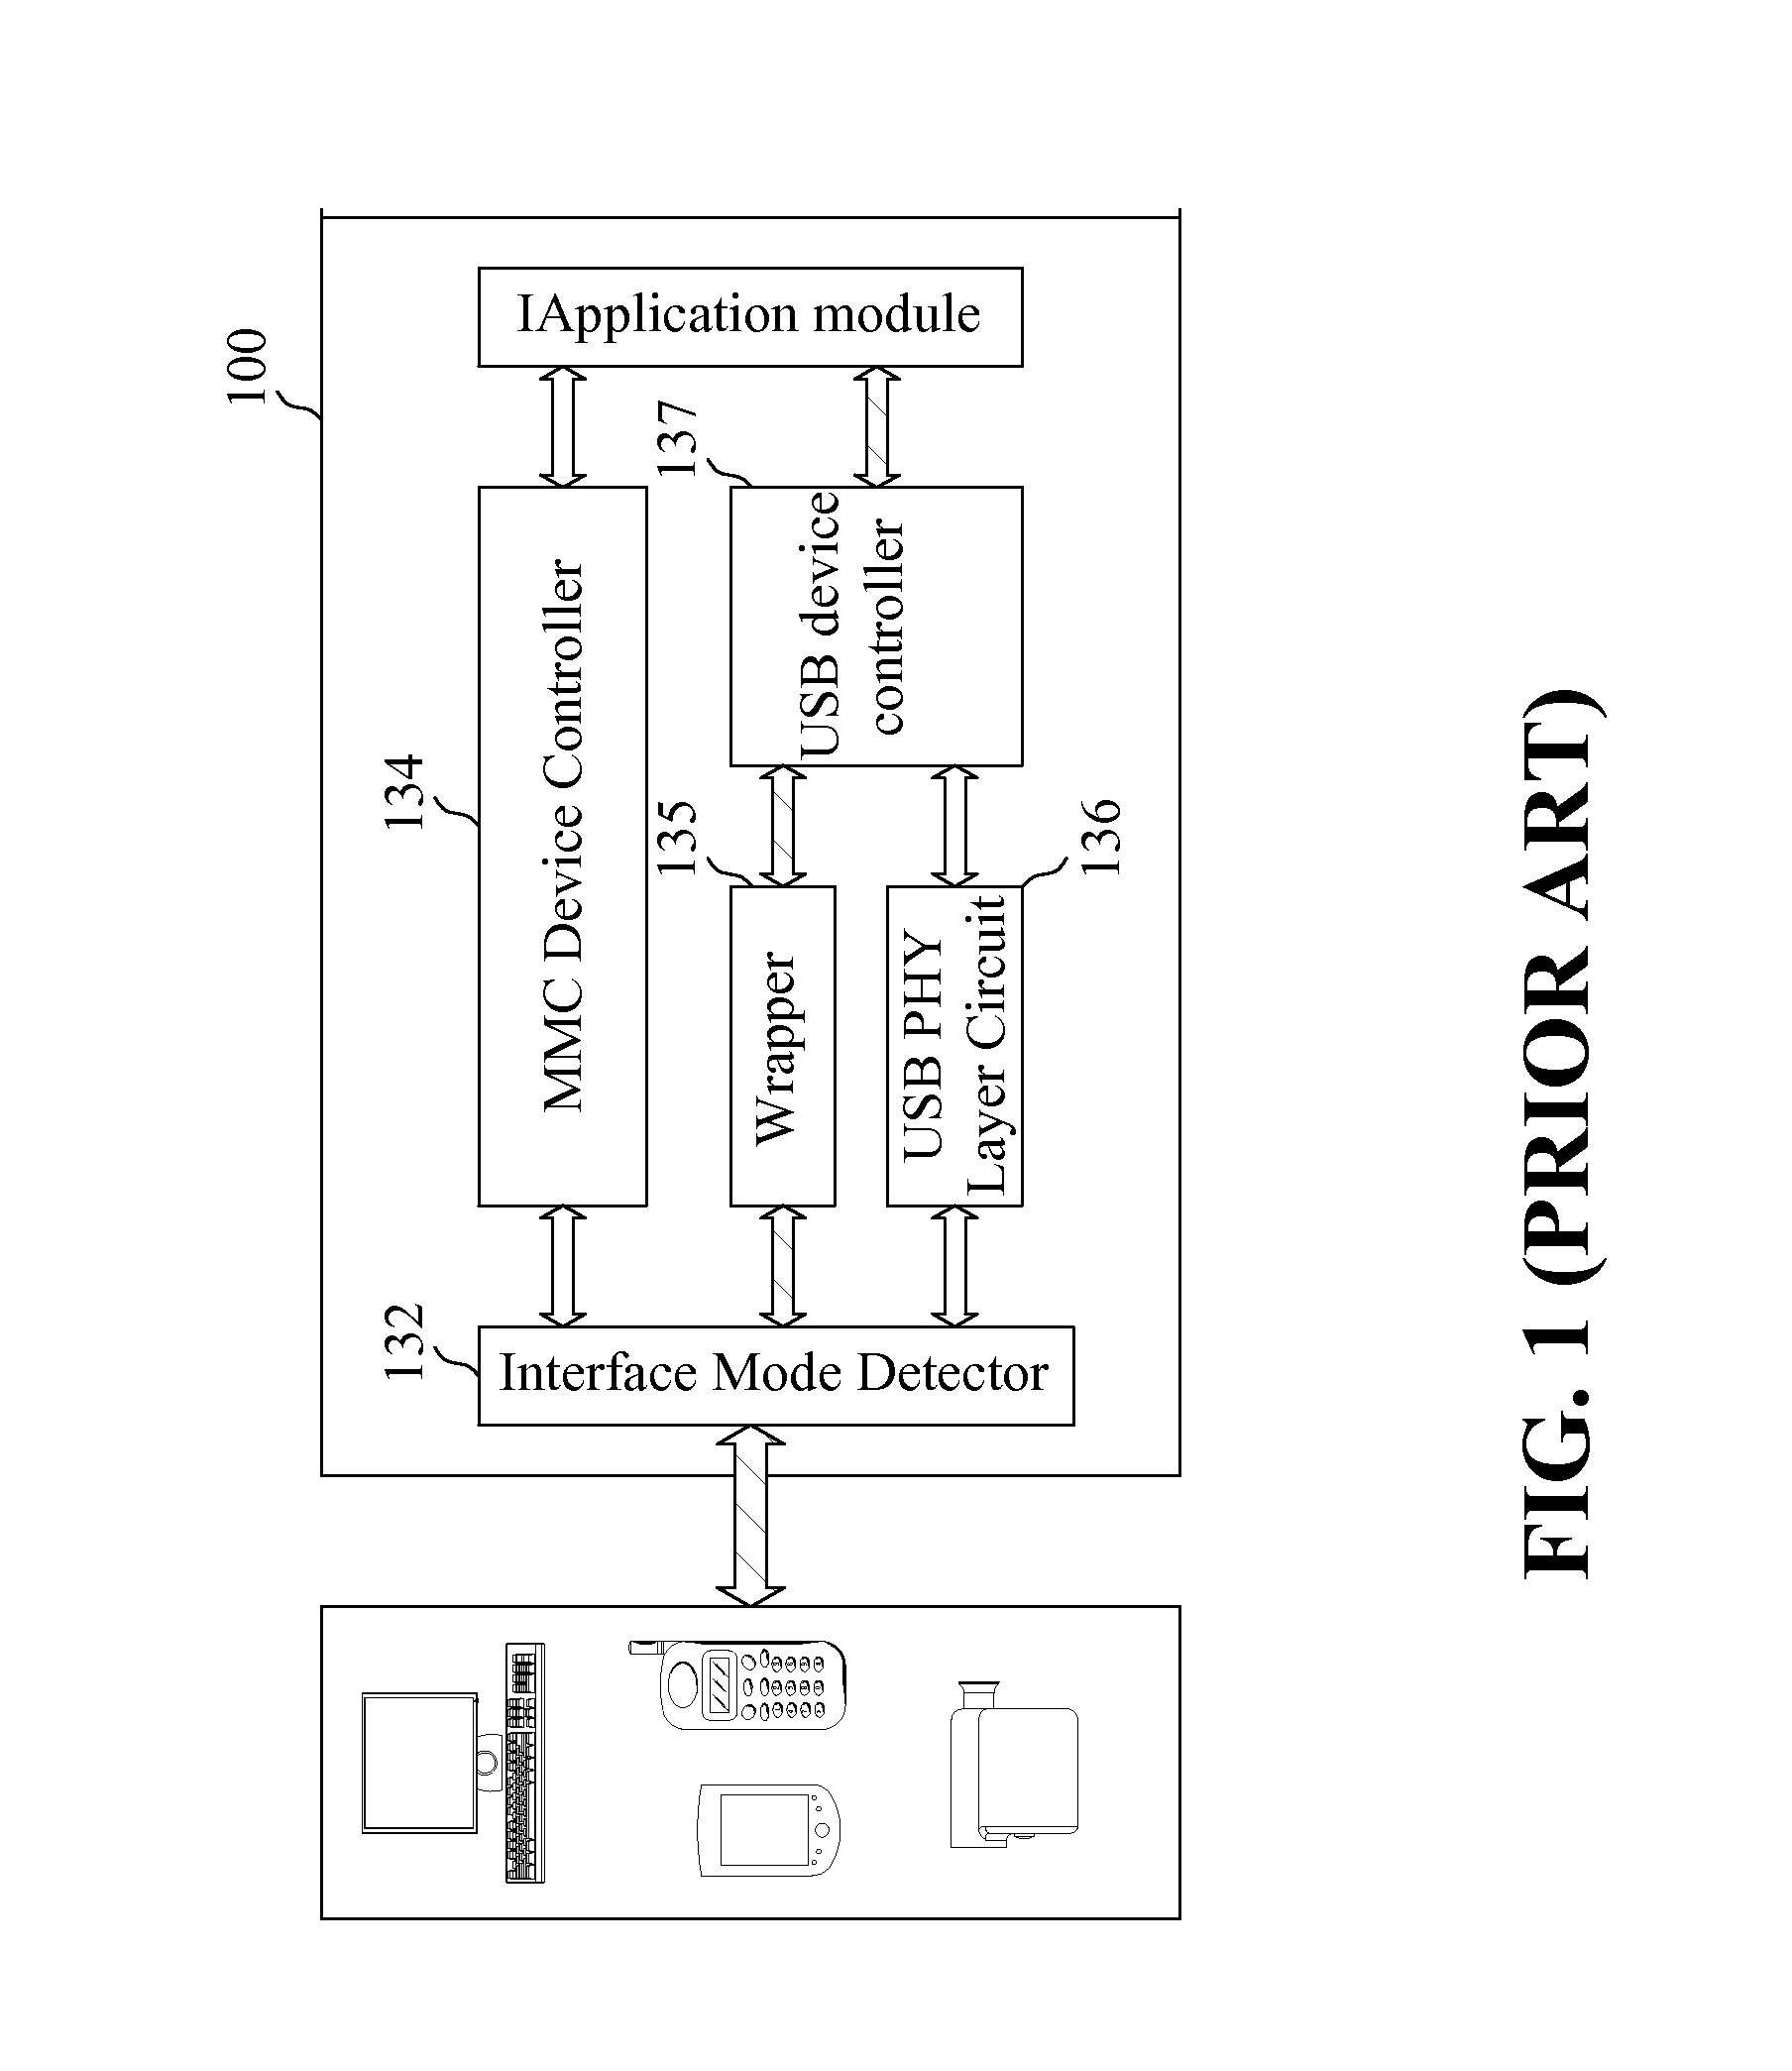 Architecture of multi-power mode serial interface